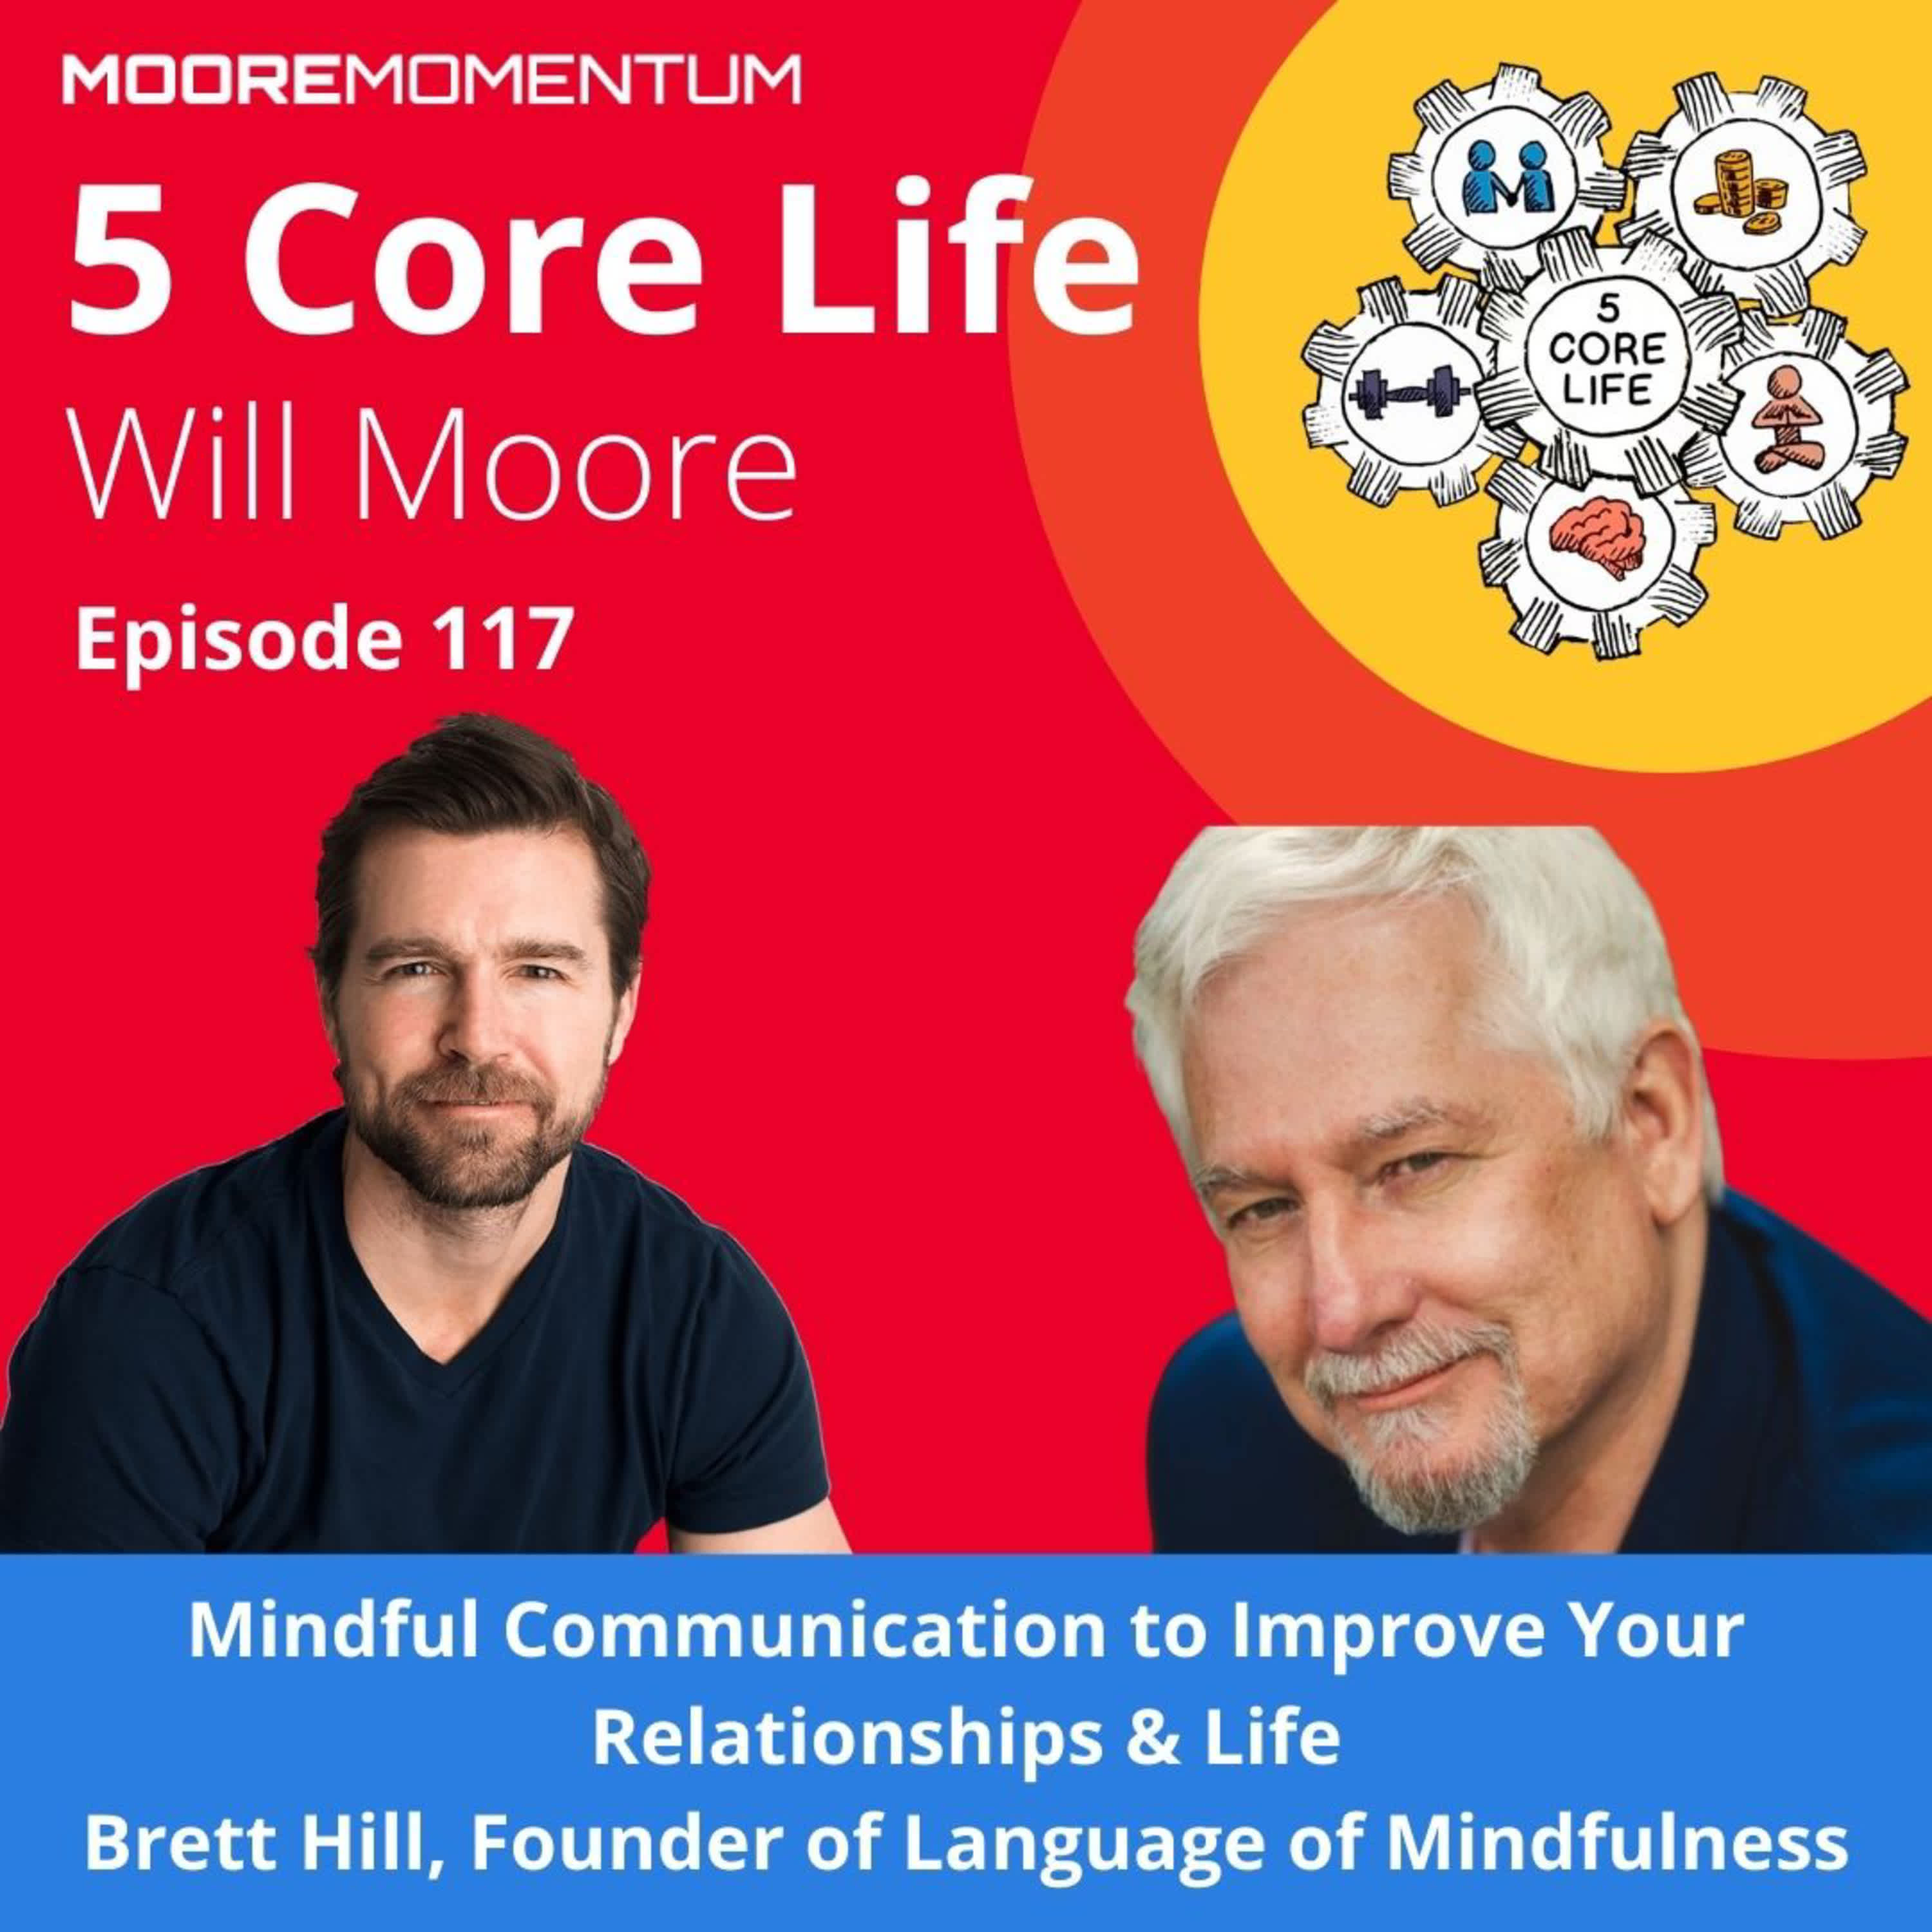 Mindful Communication to Improve Your Relationships and Life | Brett Hill, Founder of the Language of Mindfulness